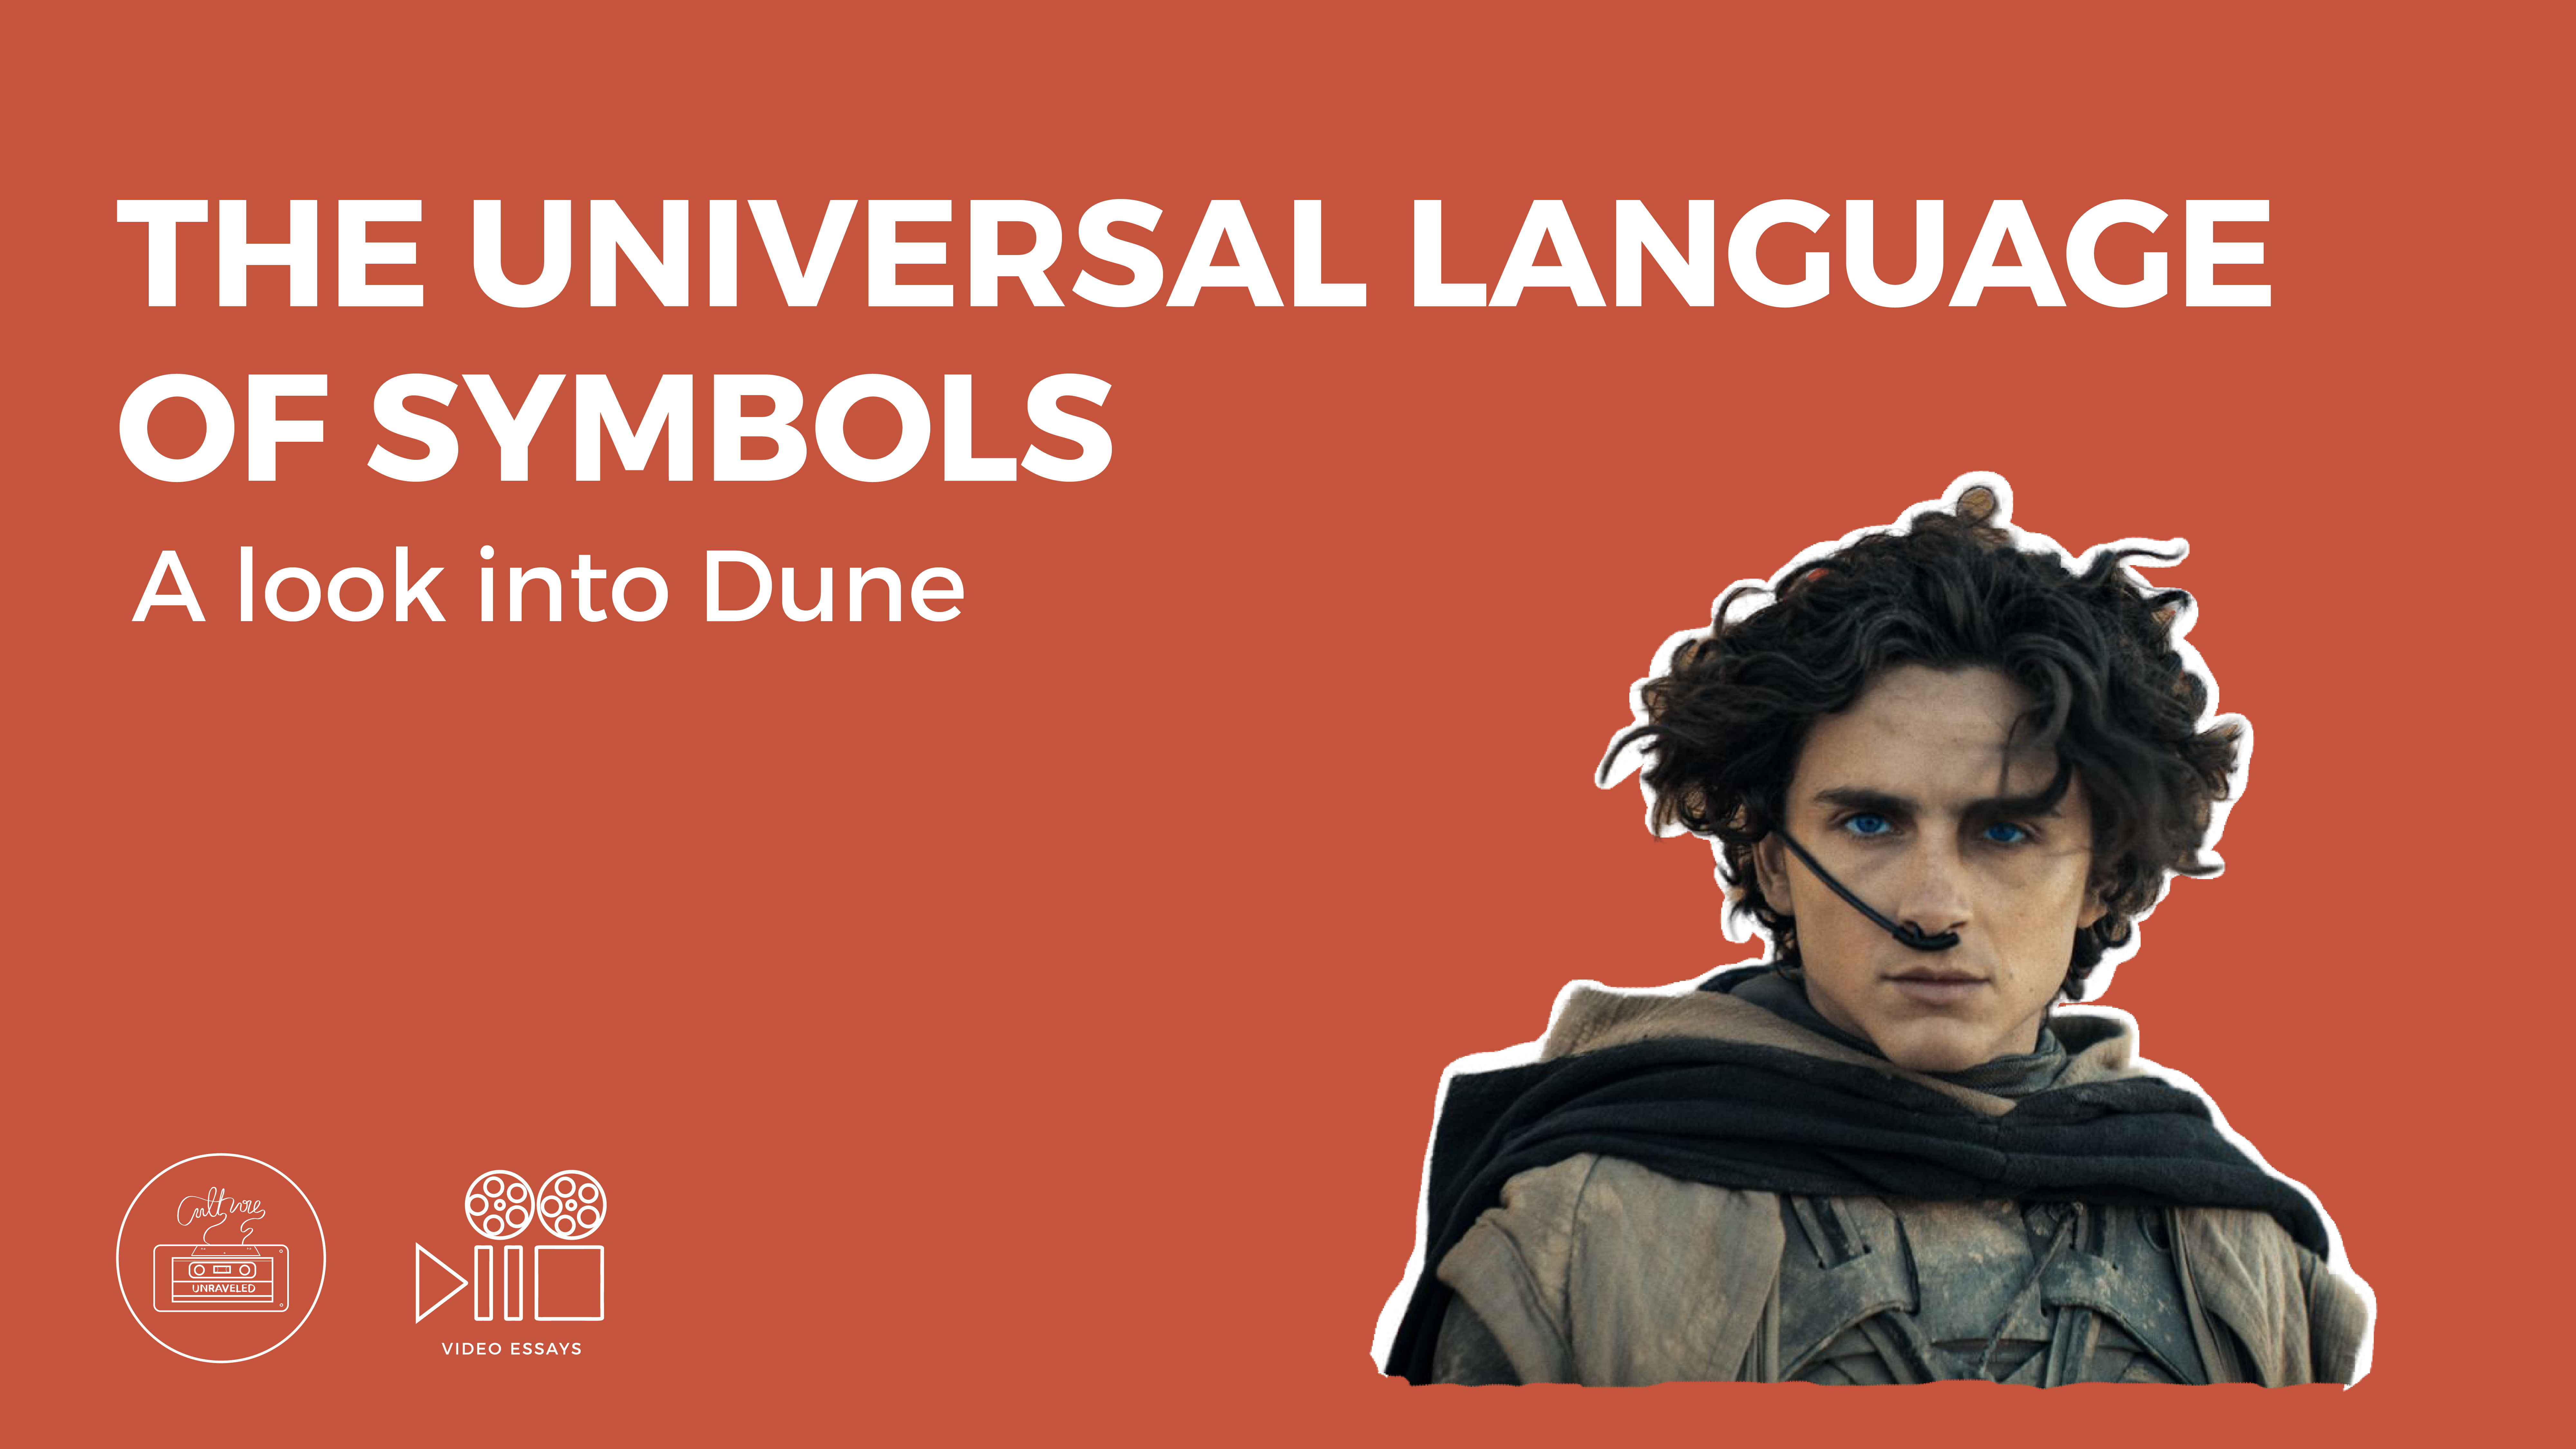 The Universal Language of Symbols. A Look into Dune